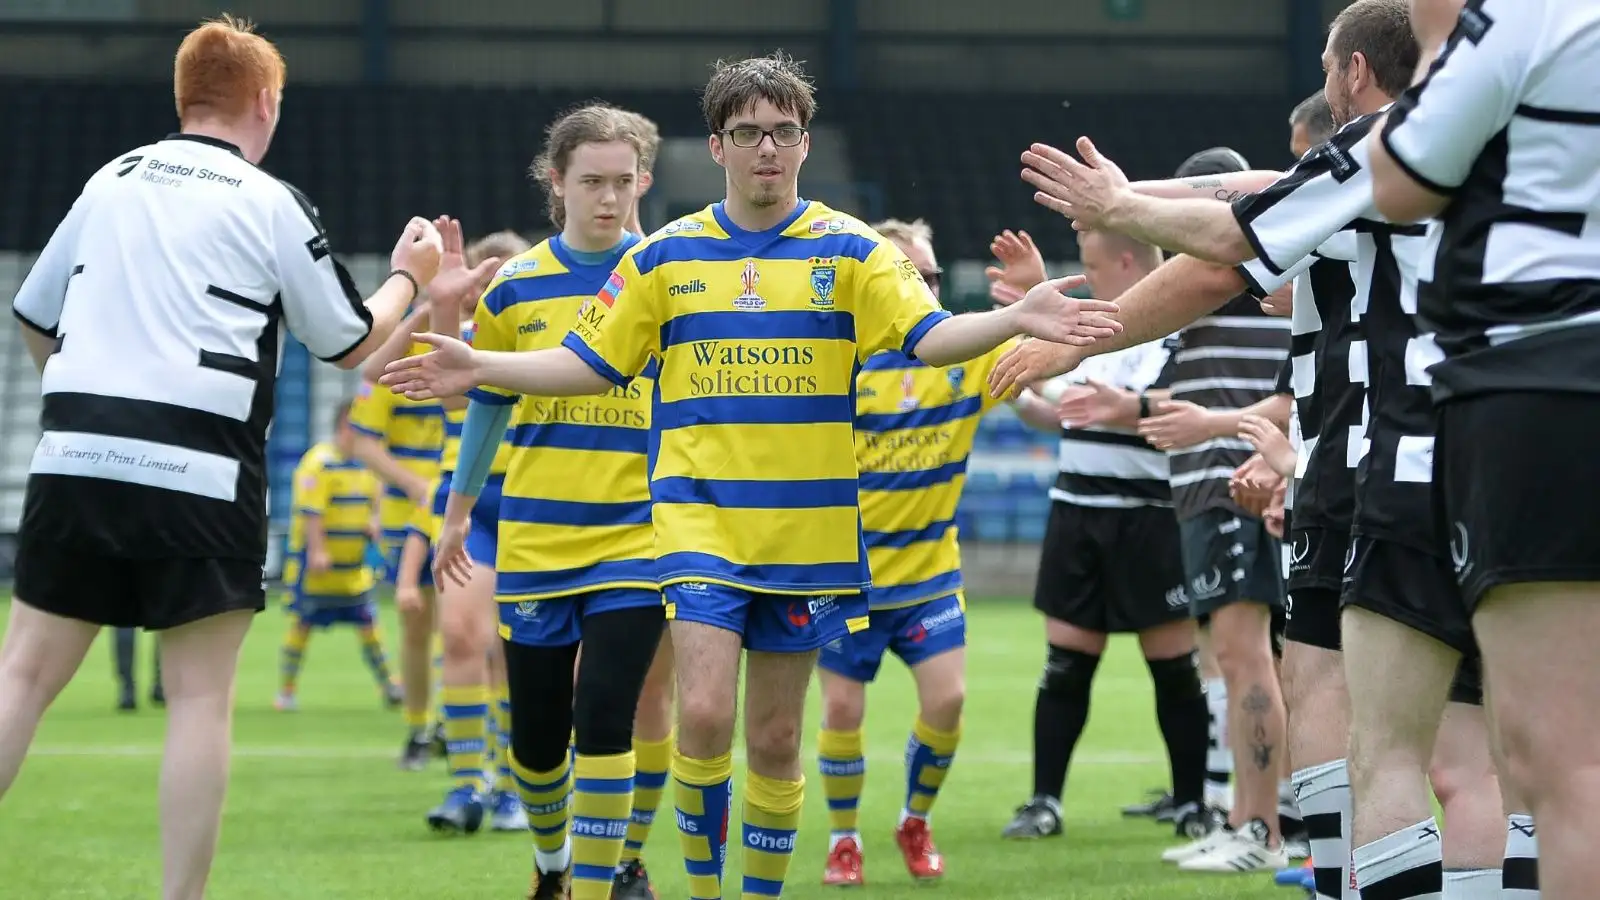 Warrington player Jake Lindsay living his dreams through the Learning Disability Super League